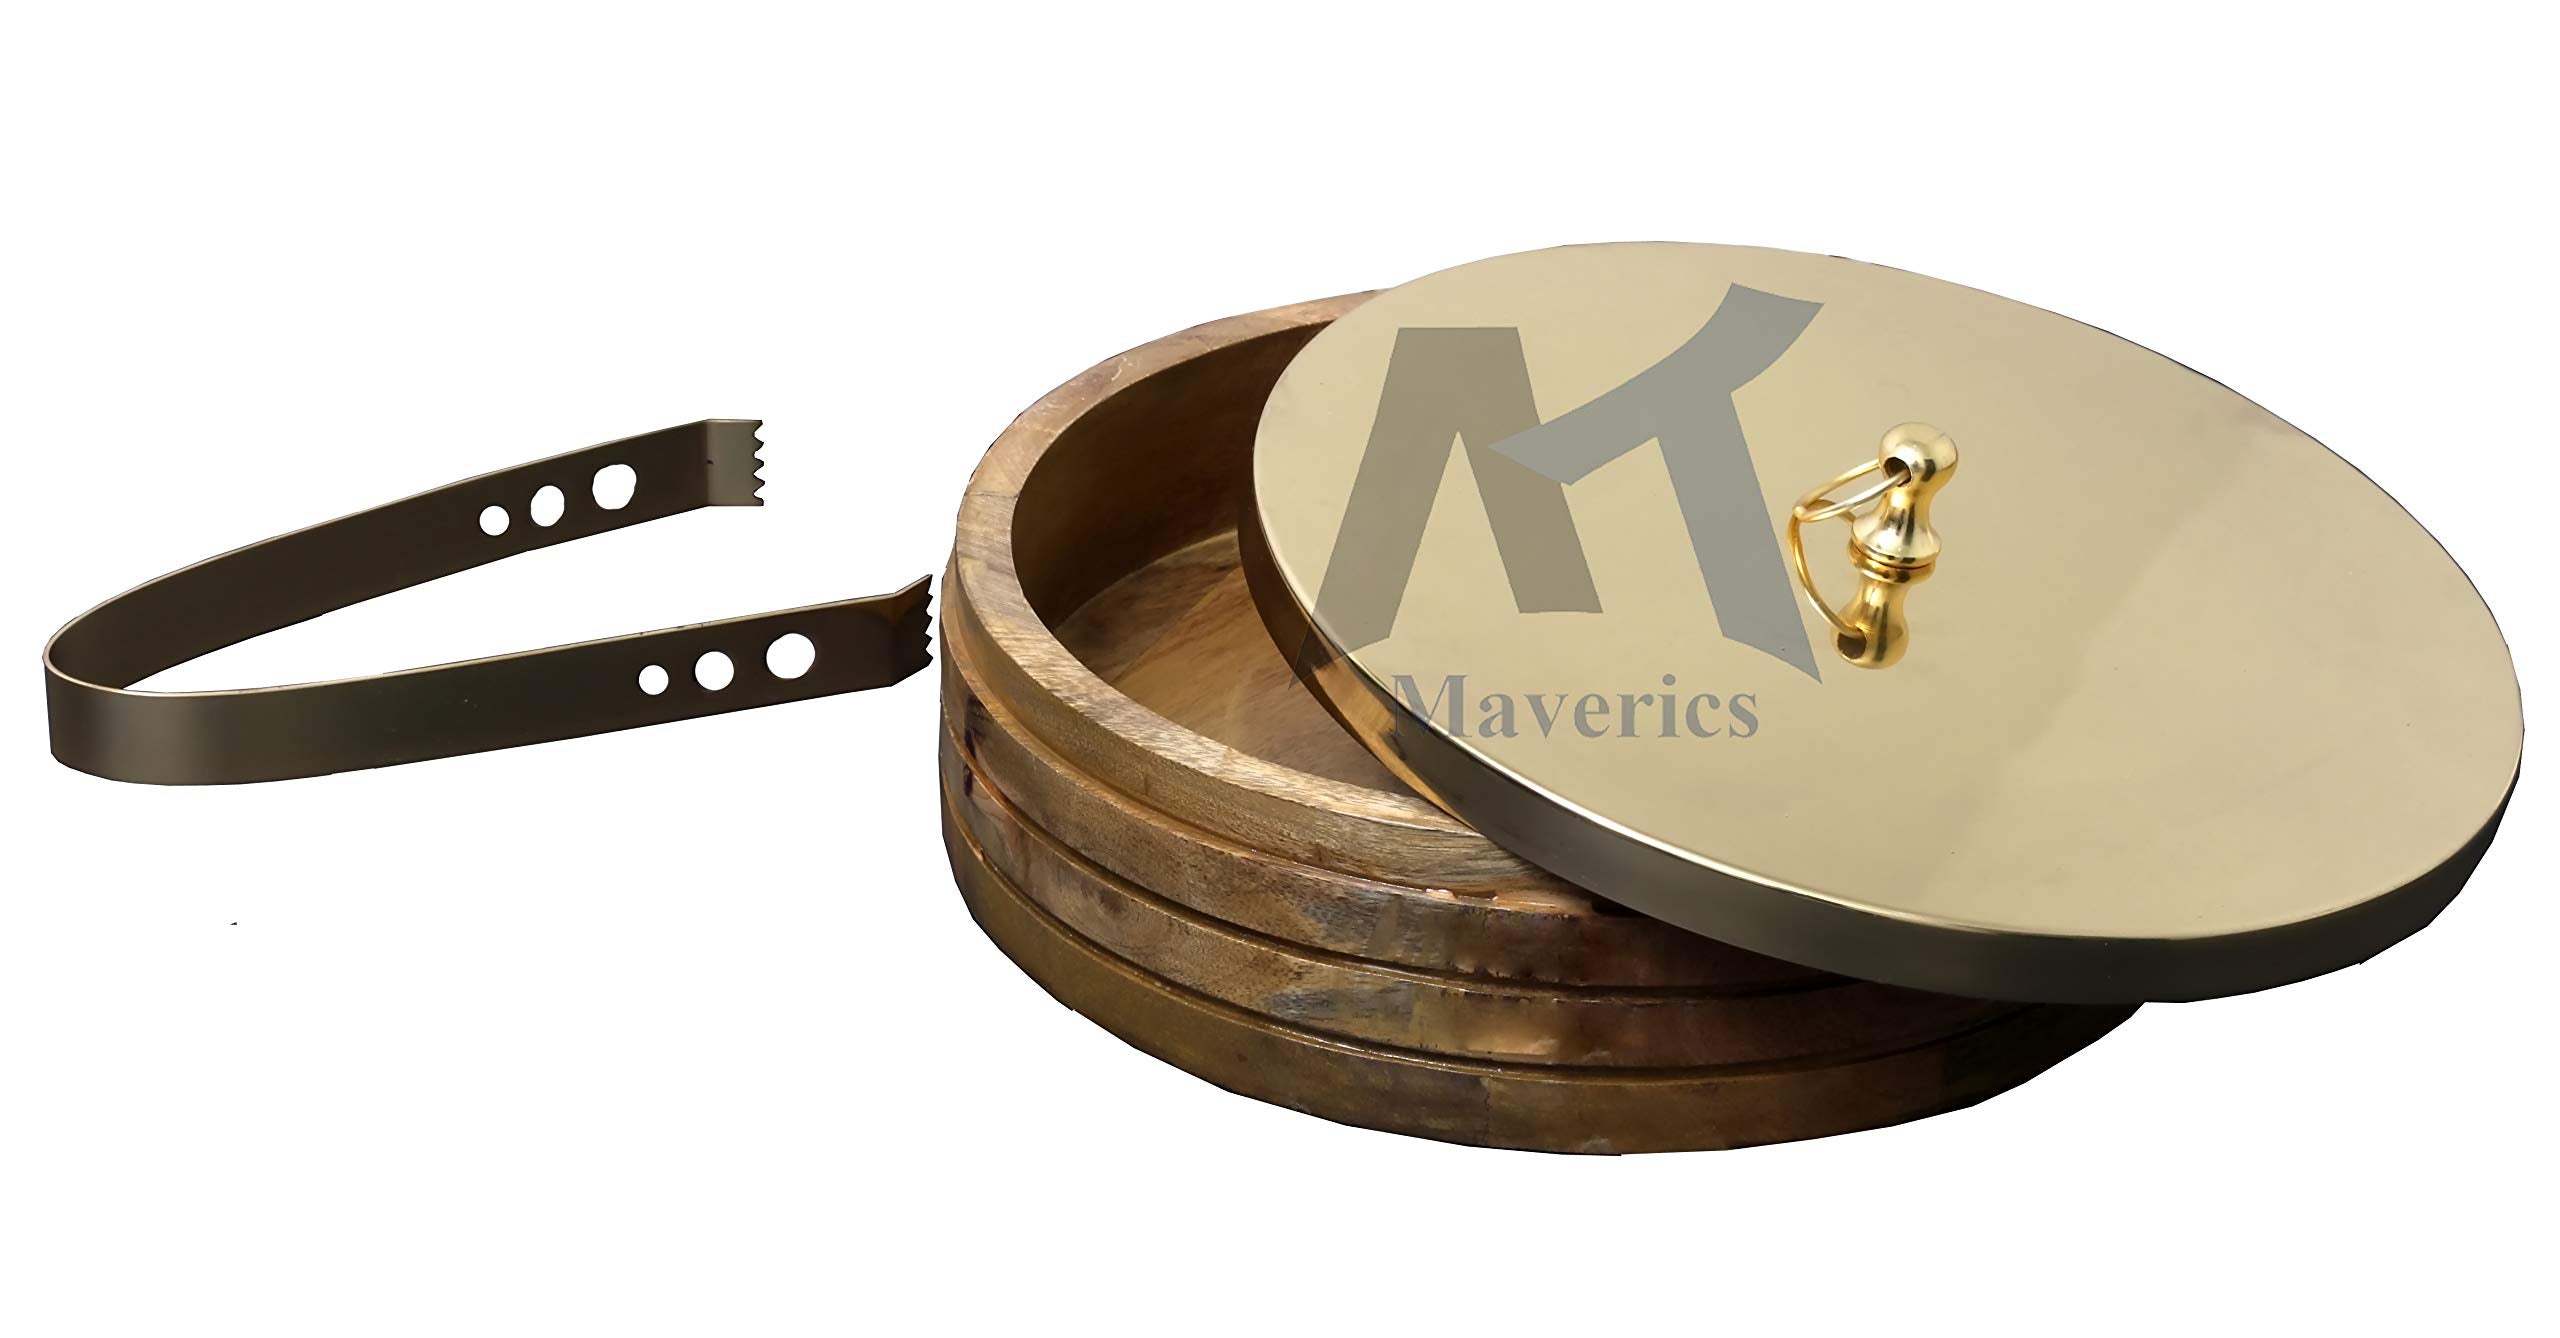 Maverics Wooden Serving Bowl with Lid - Maverics Stainless Steel Solid - Brown - Durable & Stylish Kitchenware for Serving & Storage - 1-Piece